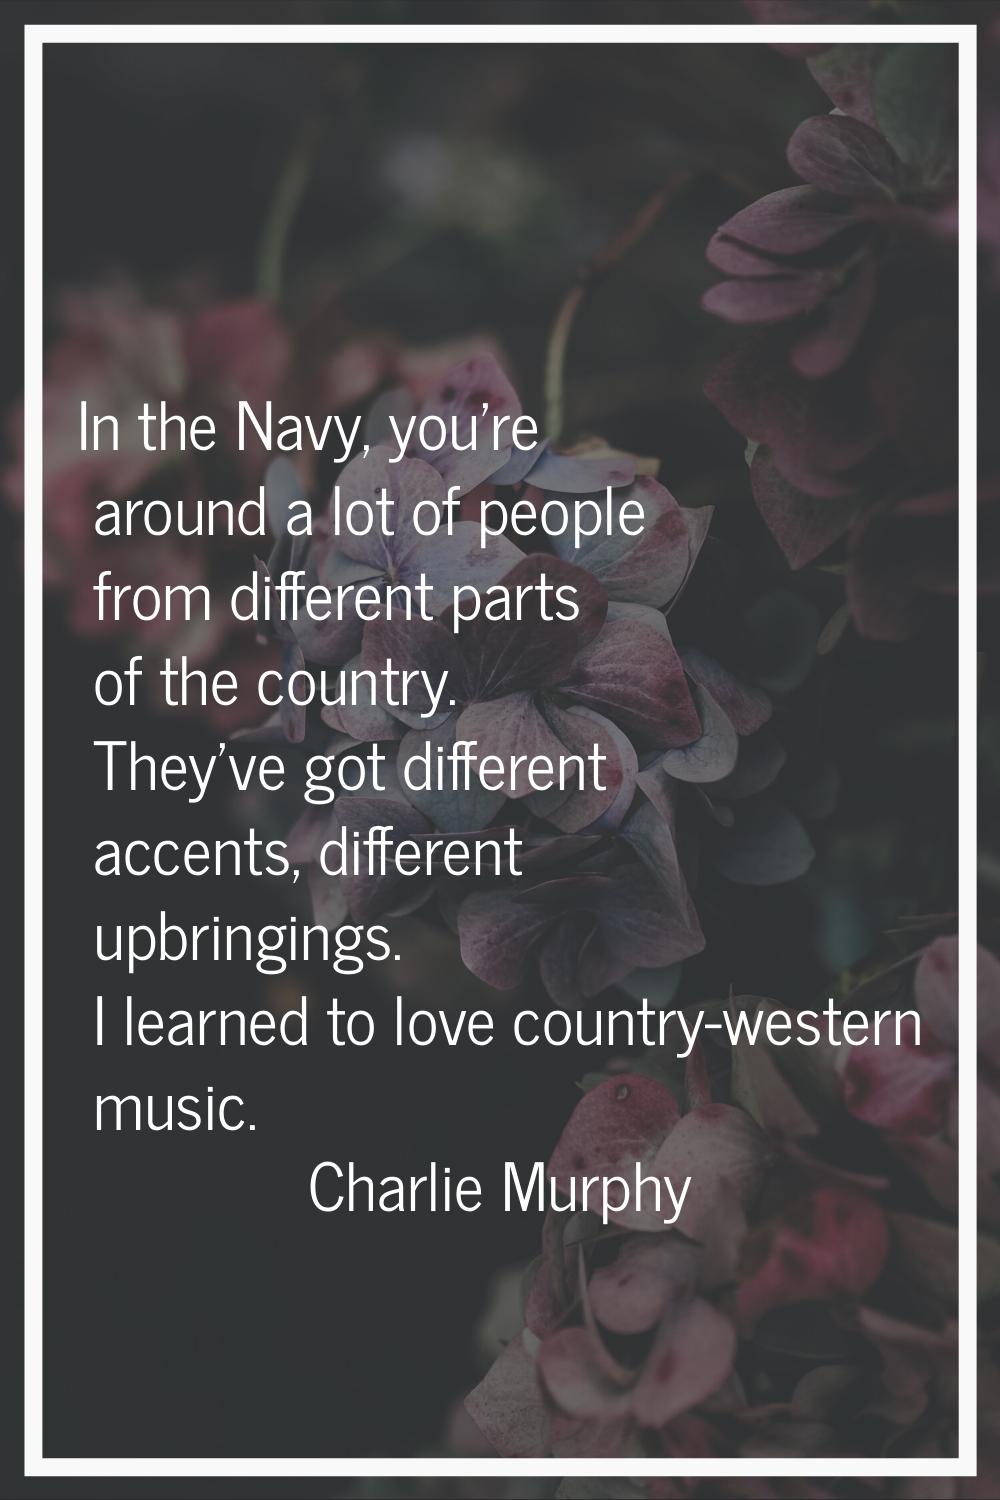 In the Navy, you're around a lot of people from different parts of the country. They've got differe